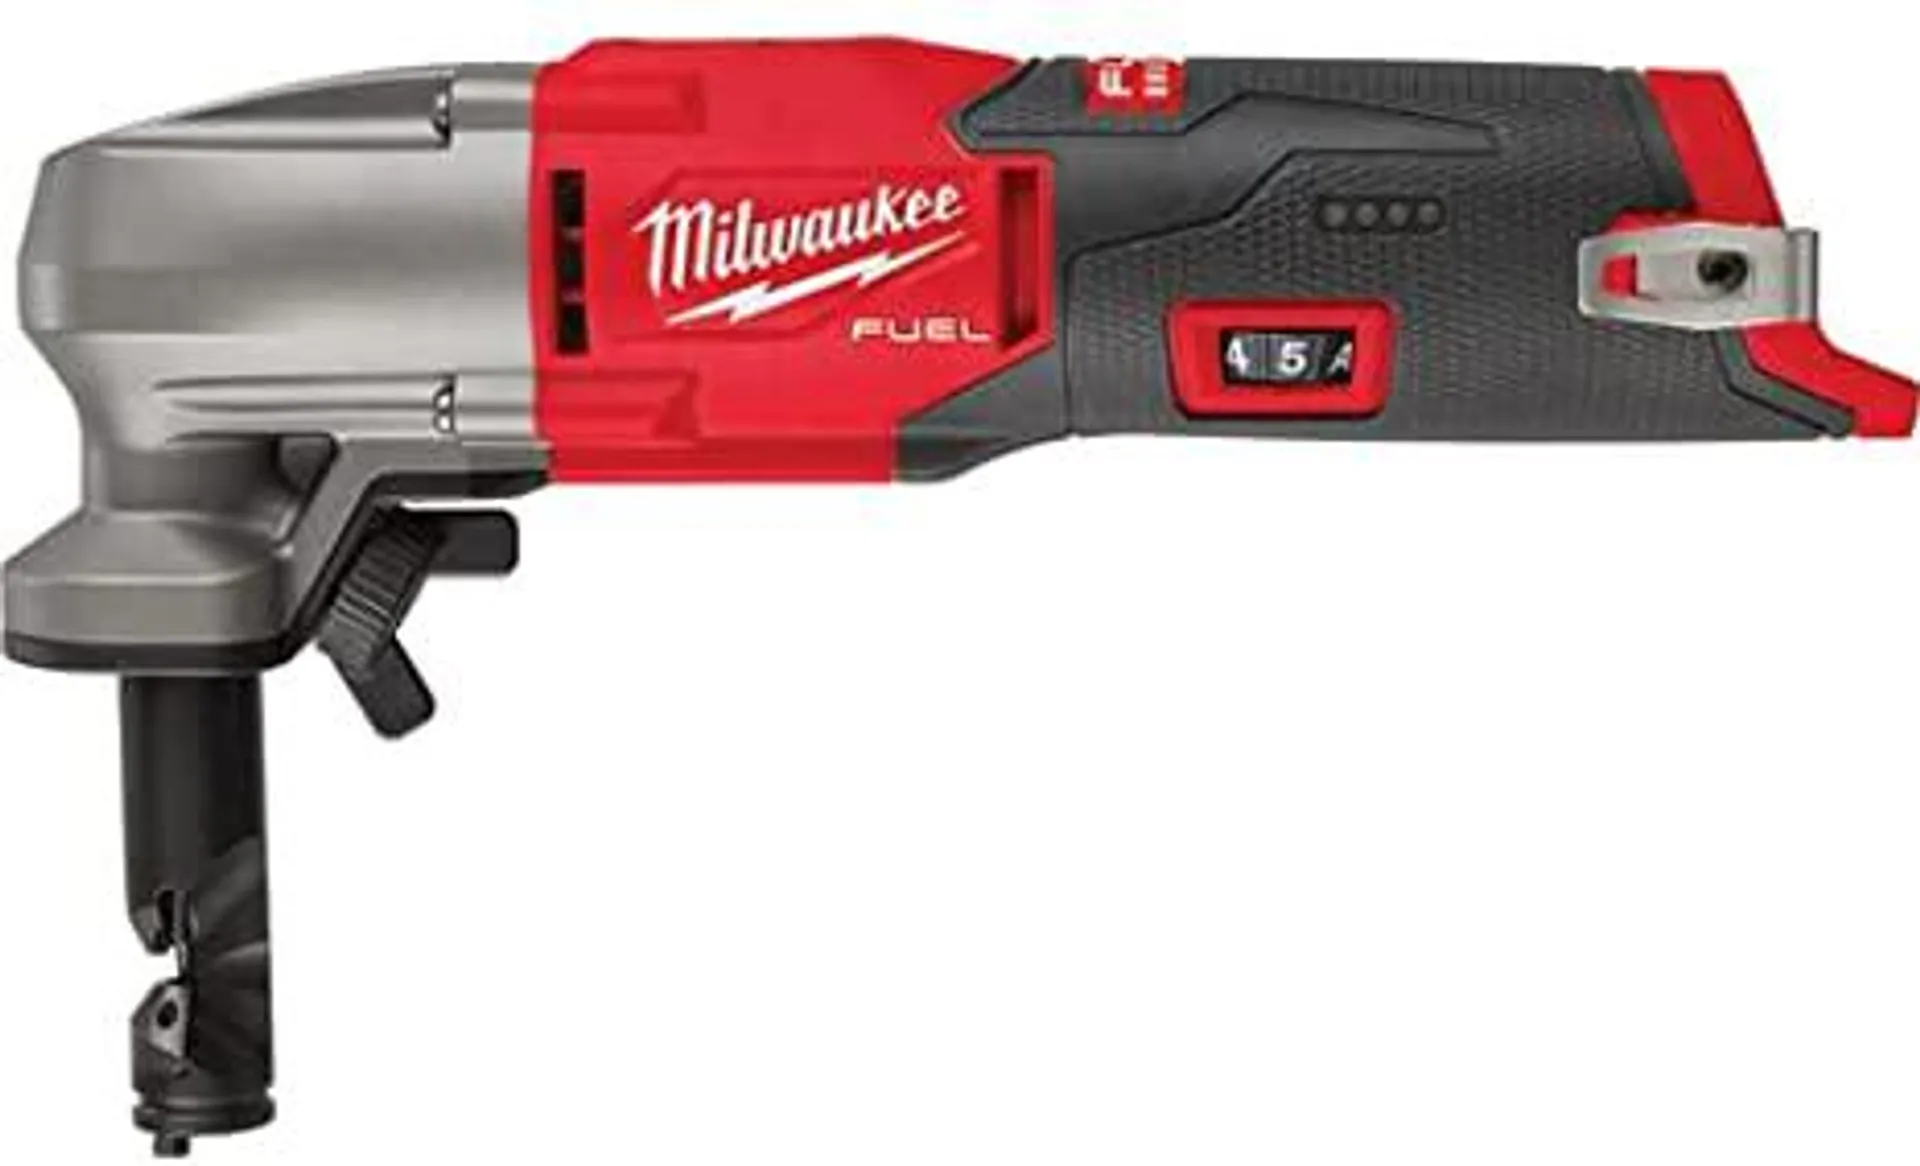 Milwaukee M12 FUEL 16 Gauge Variable Speed Nibbler - No Charger, No Battery, Bare Tool Only